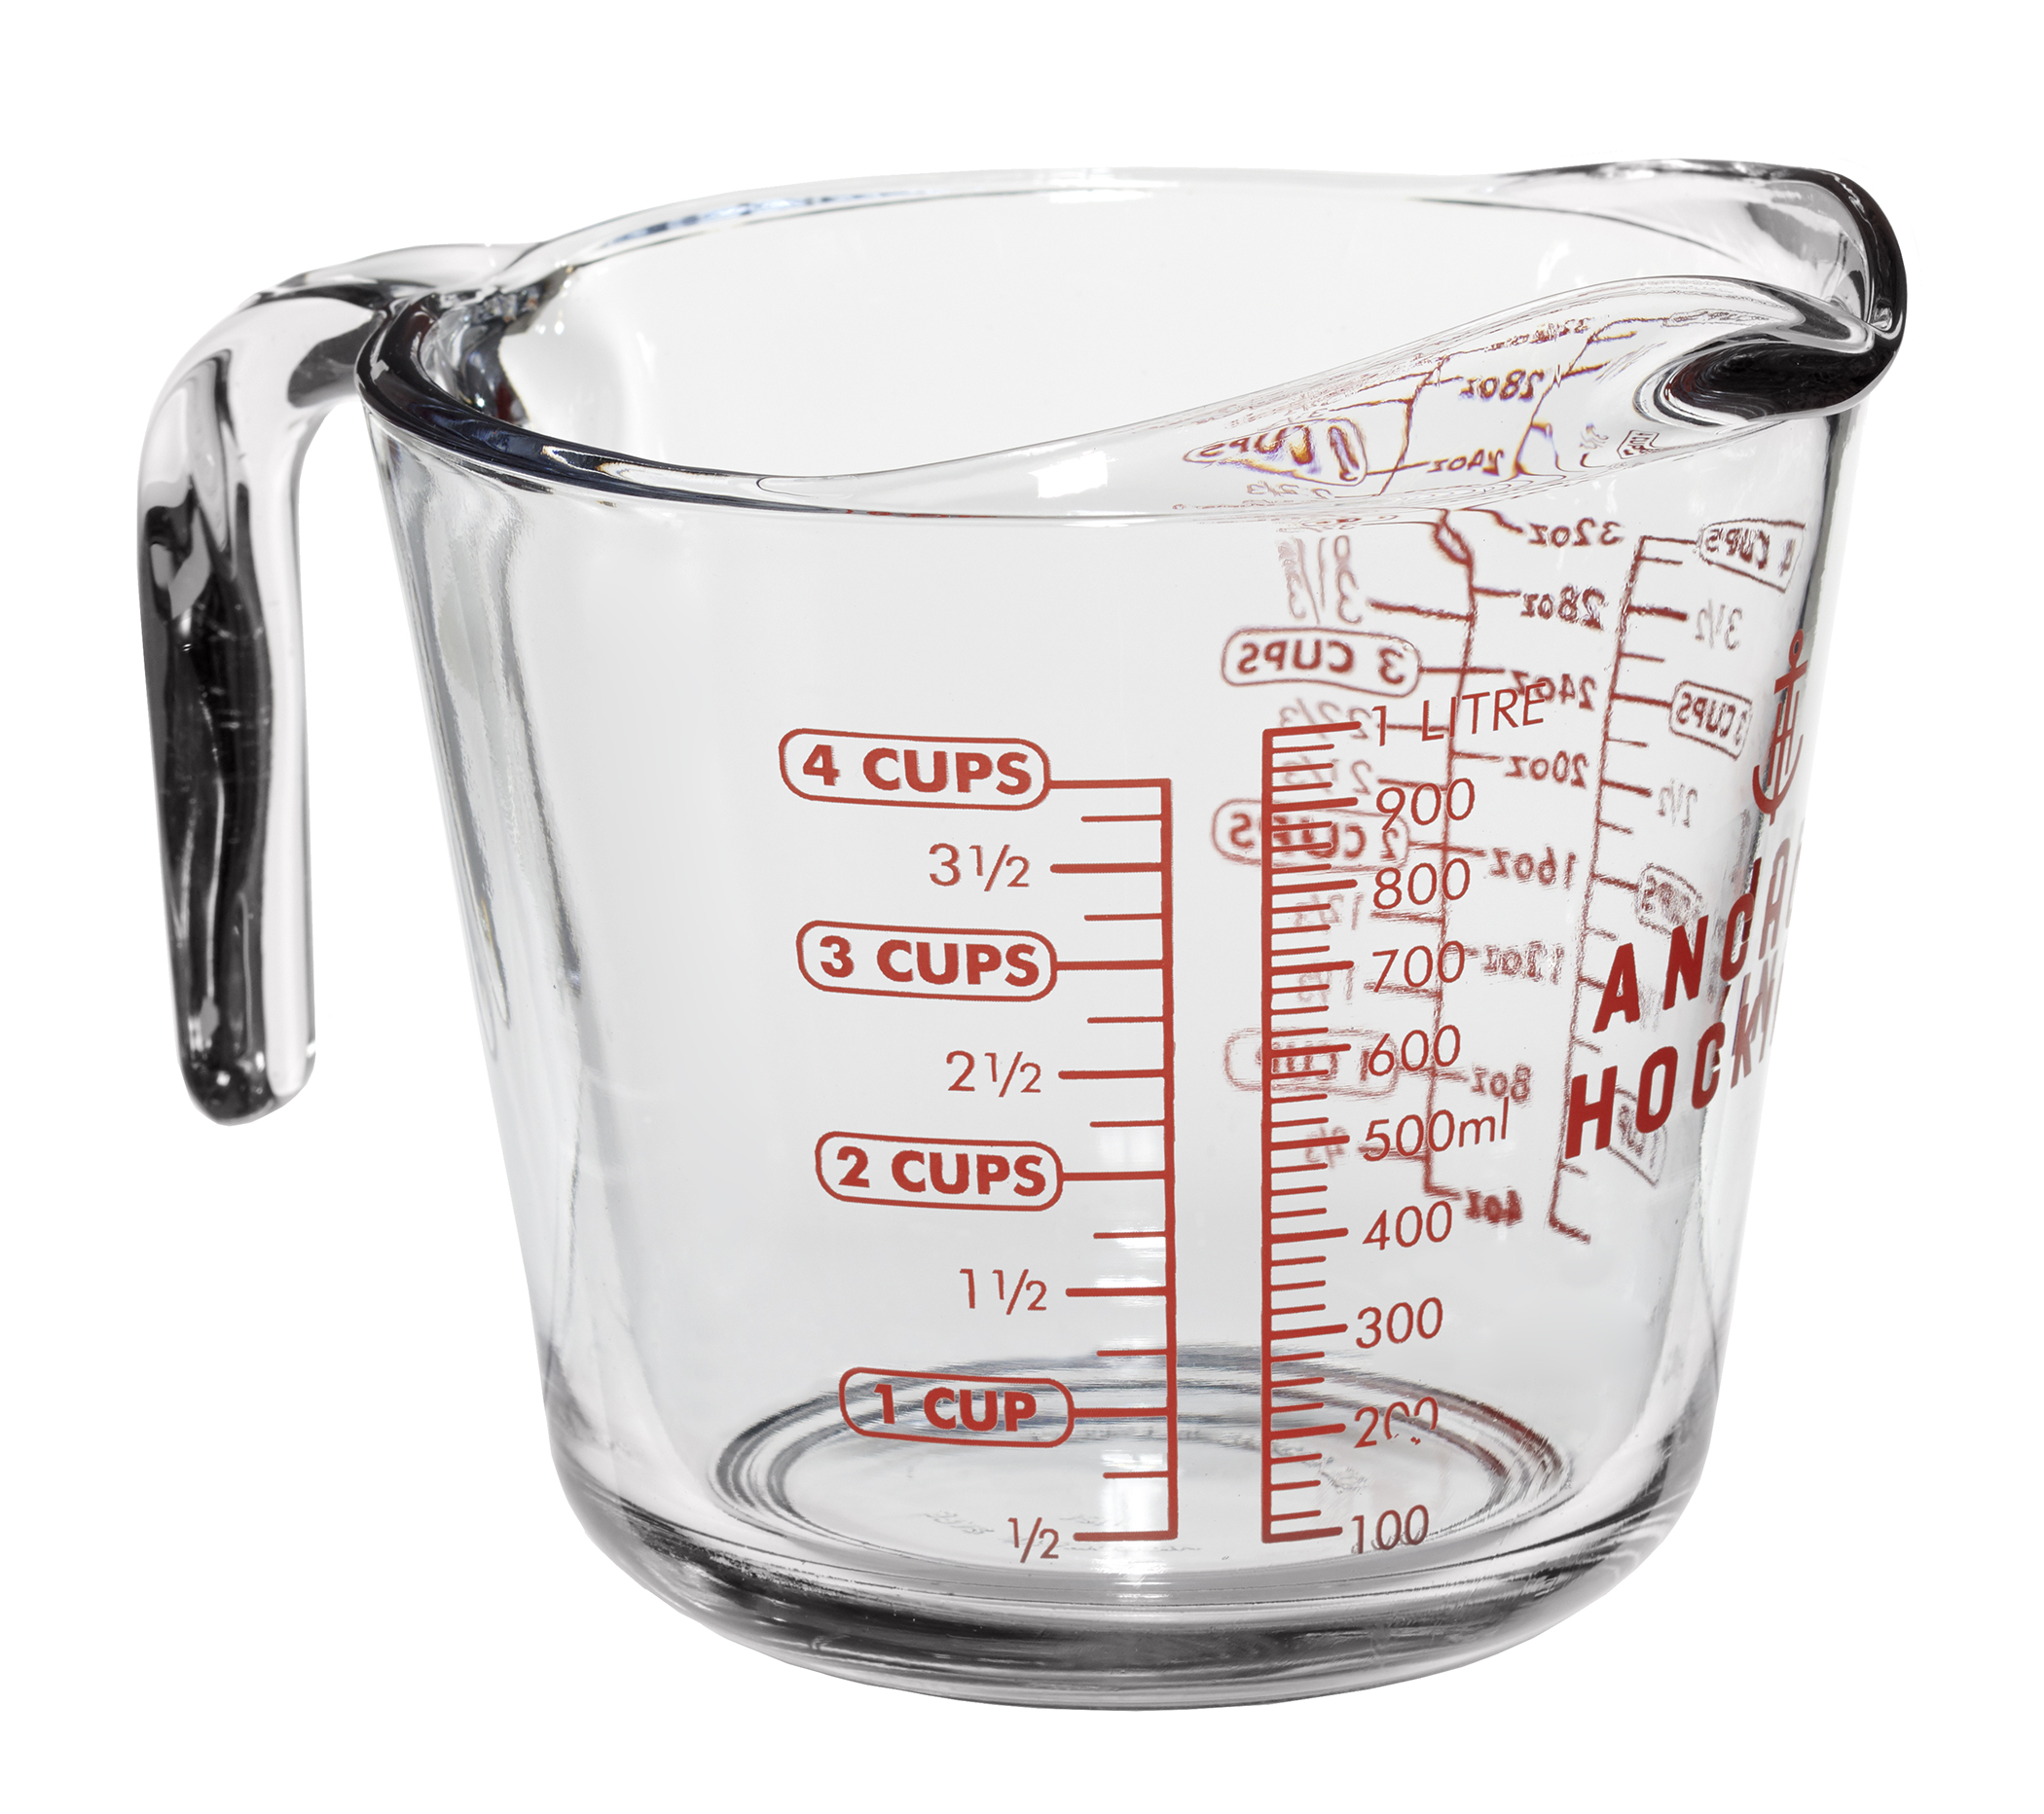 Anchor Hocking Glass Measuring Cup, 4 Cup - image 1 of 7